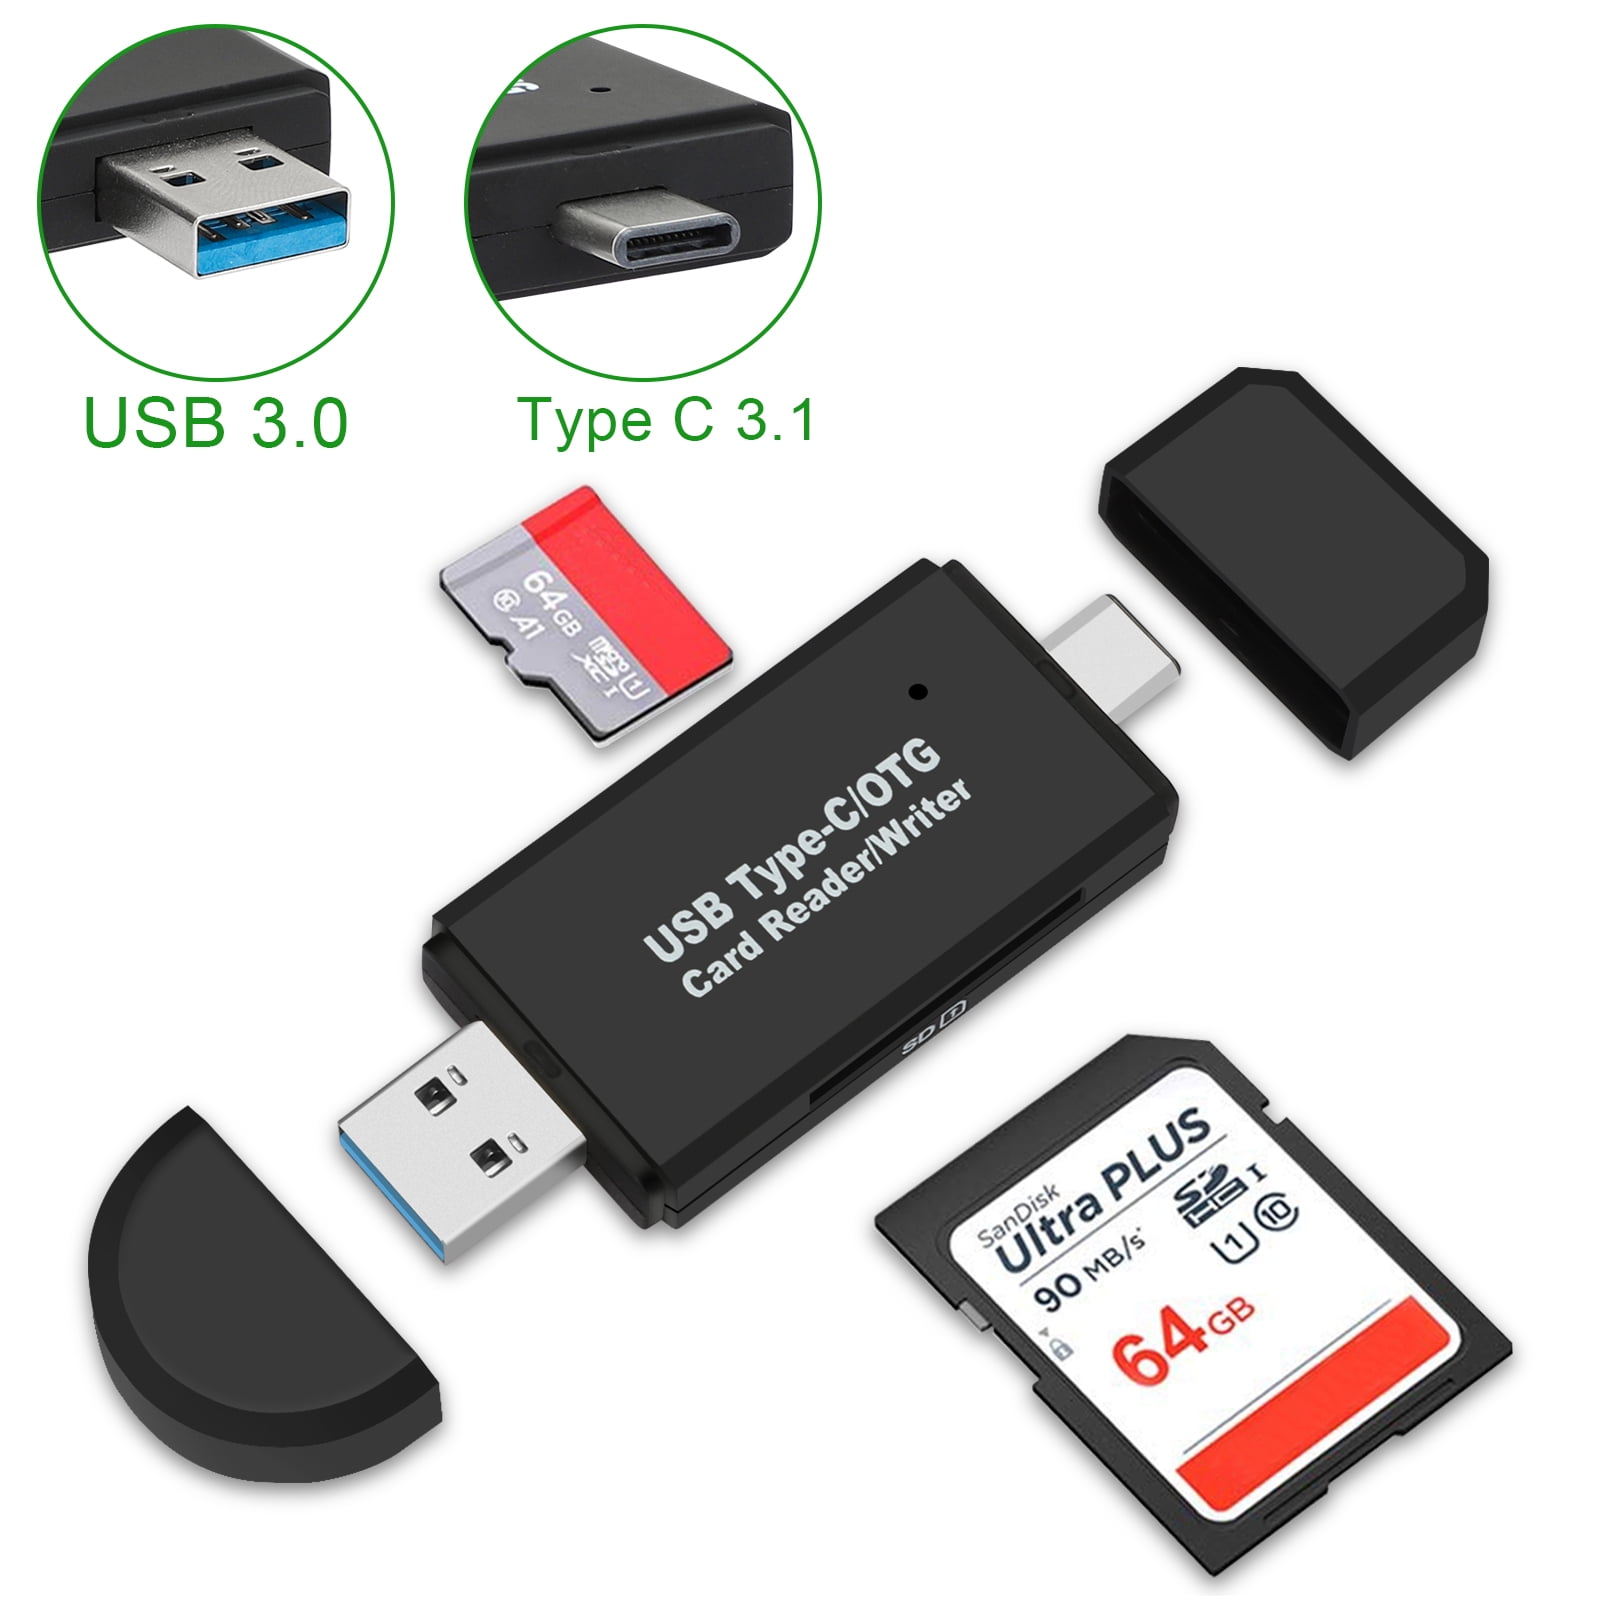 USB 2.0 Memory Card Reader Writer Adapter for SD MMC SDHC TF Card UP To 64GB HU 